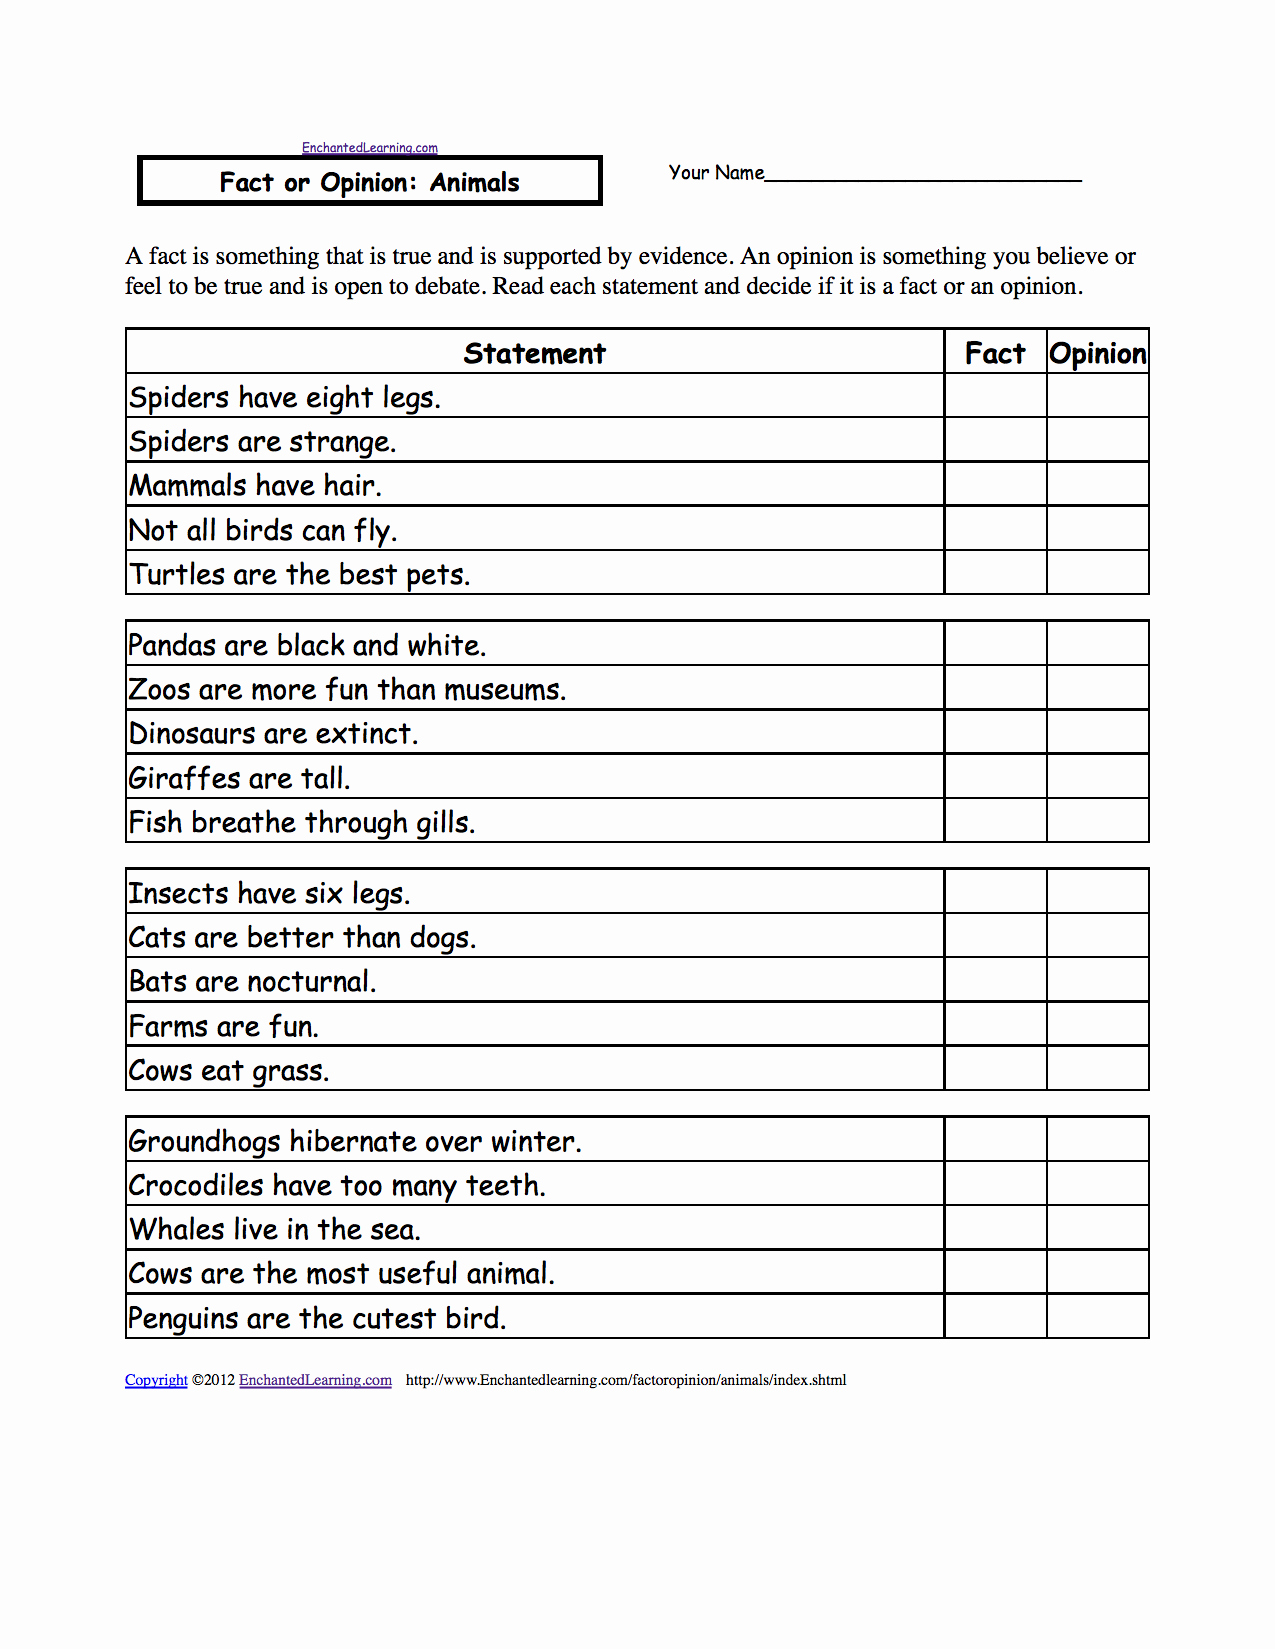 I Feel Statements Worksheet New Fact or Opinion Graphic organizer Printouts